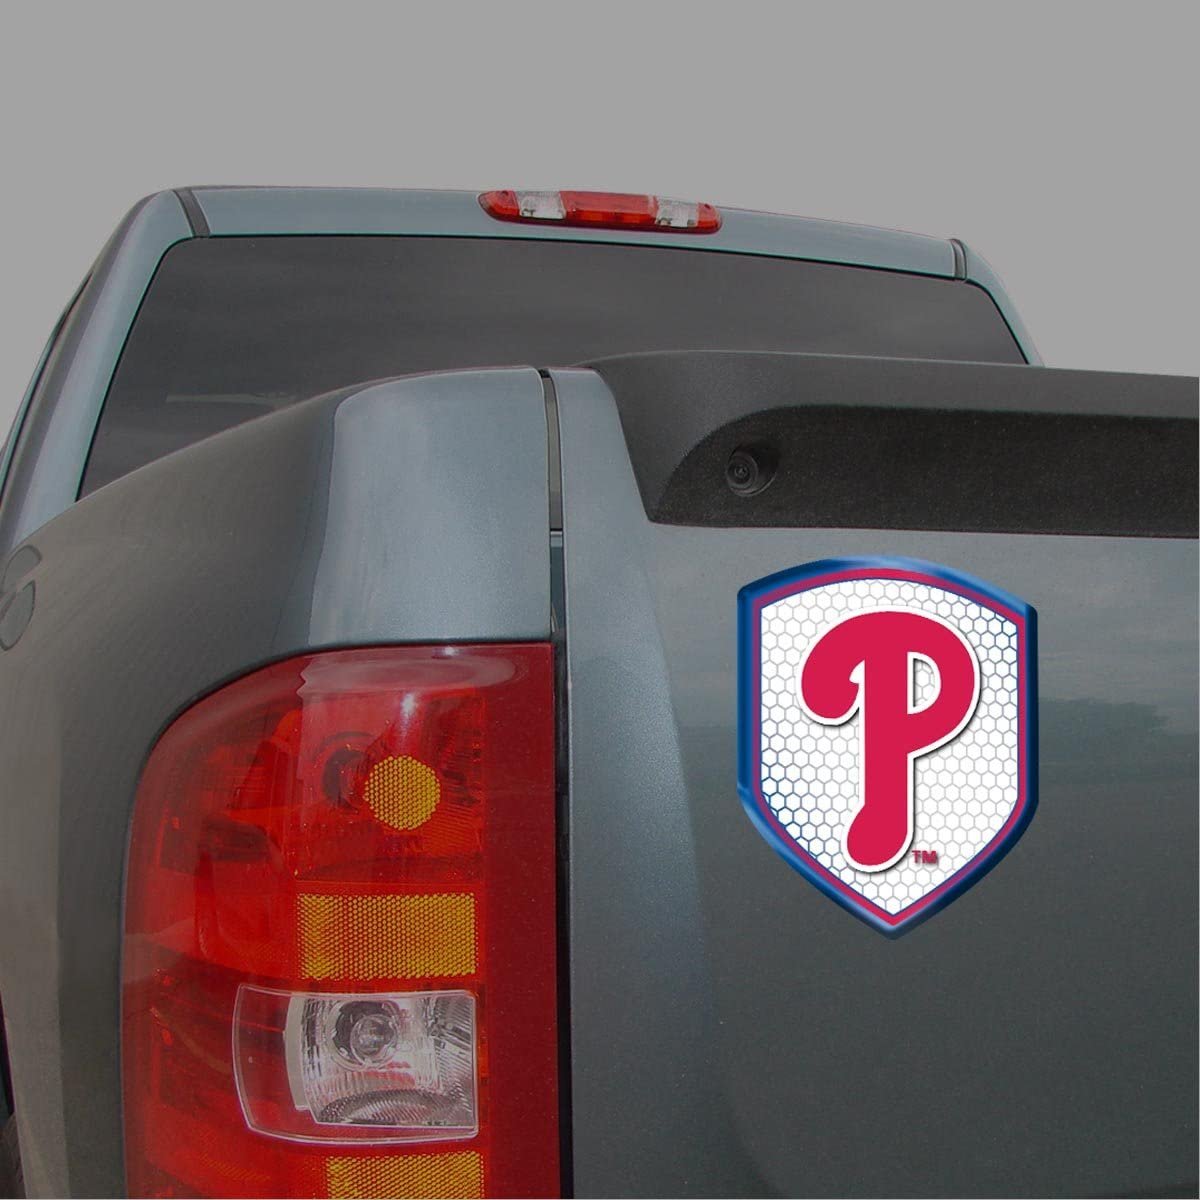 Philadelphia Phillies High Intensity Reflector, Shield Shape, Raised Decal Sticker, 2.5x3.5 Inch, Home or Auto, Full Adhesive Backing